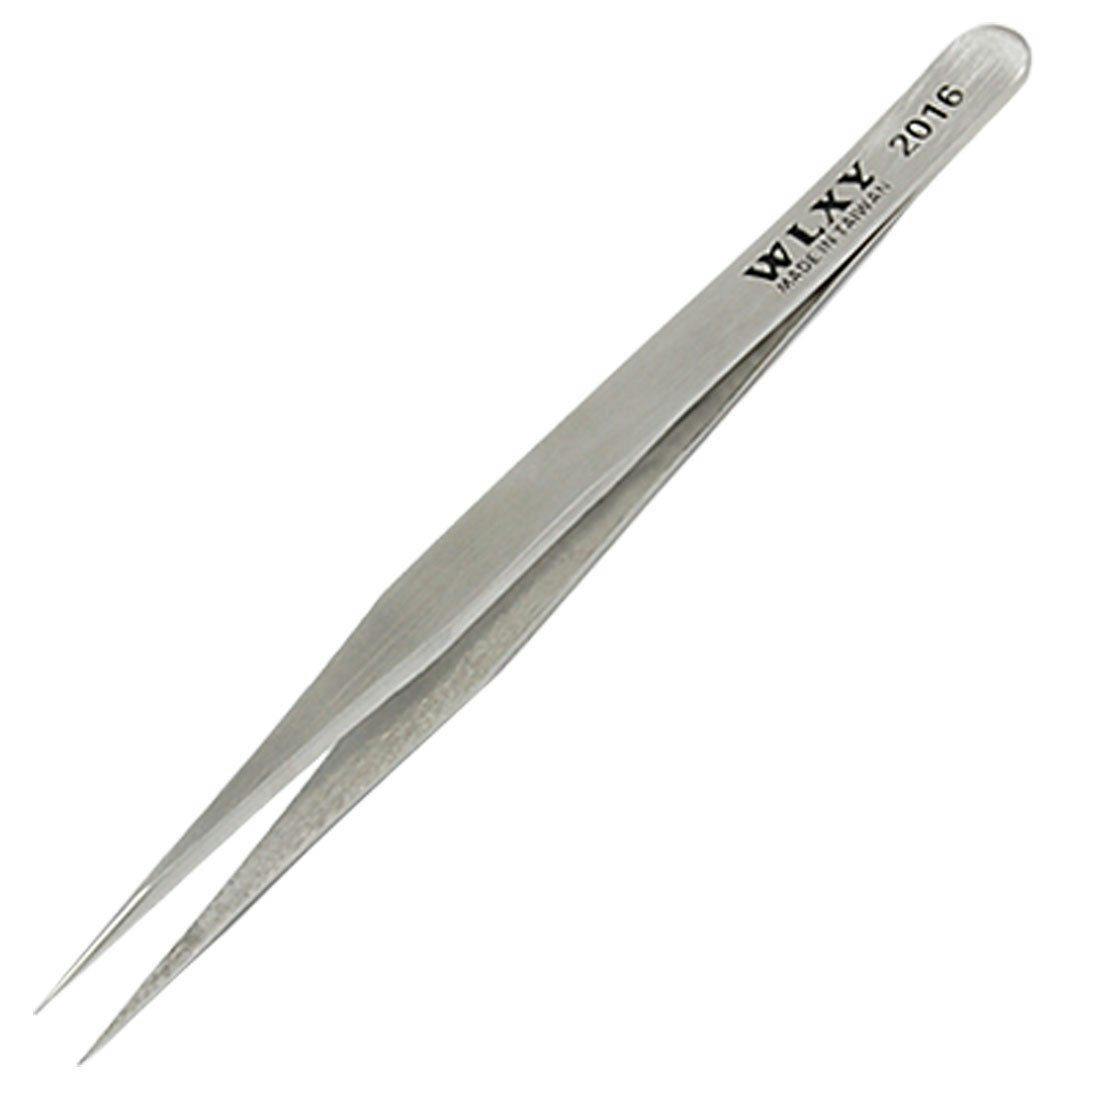 What Are Tweezers Used for in Jewelry Making?